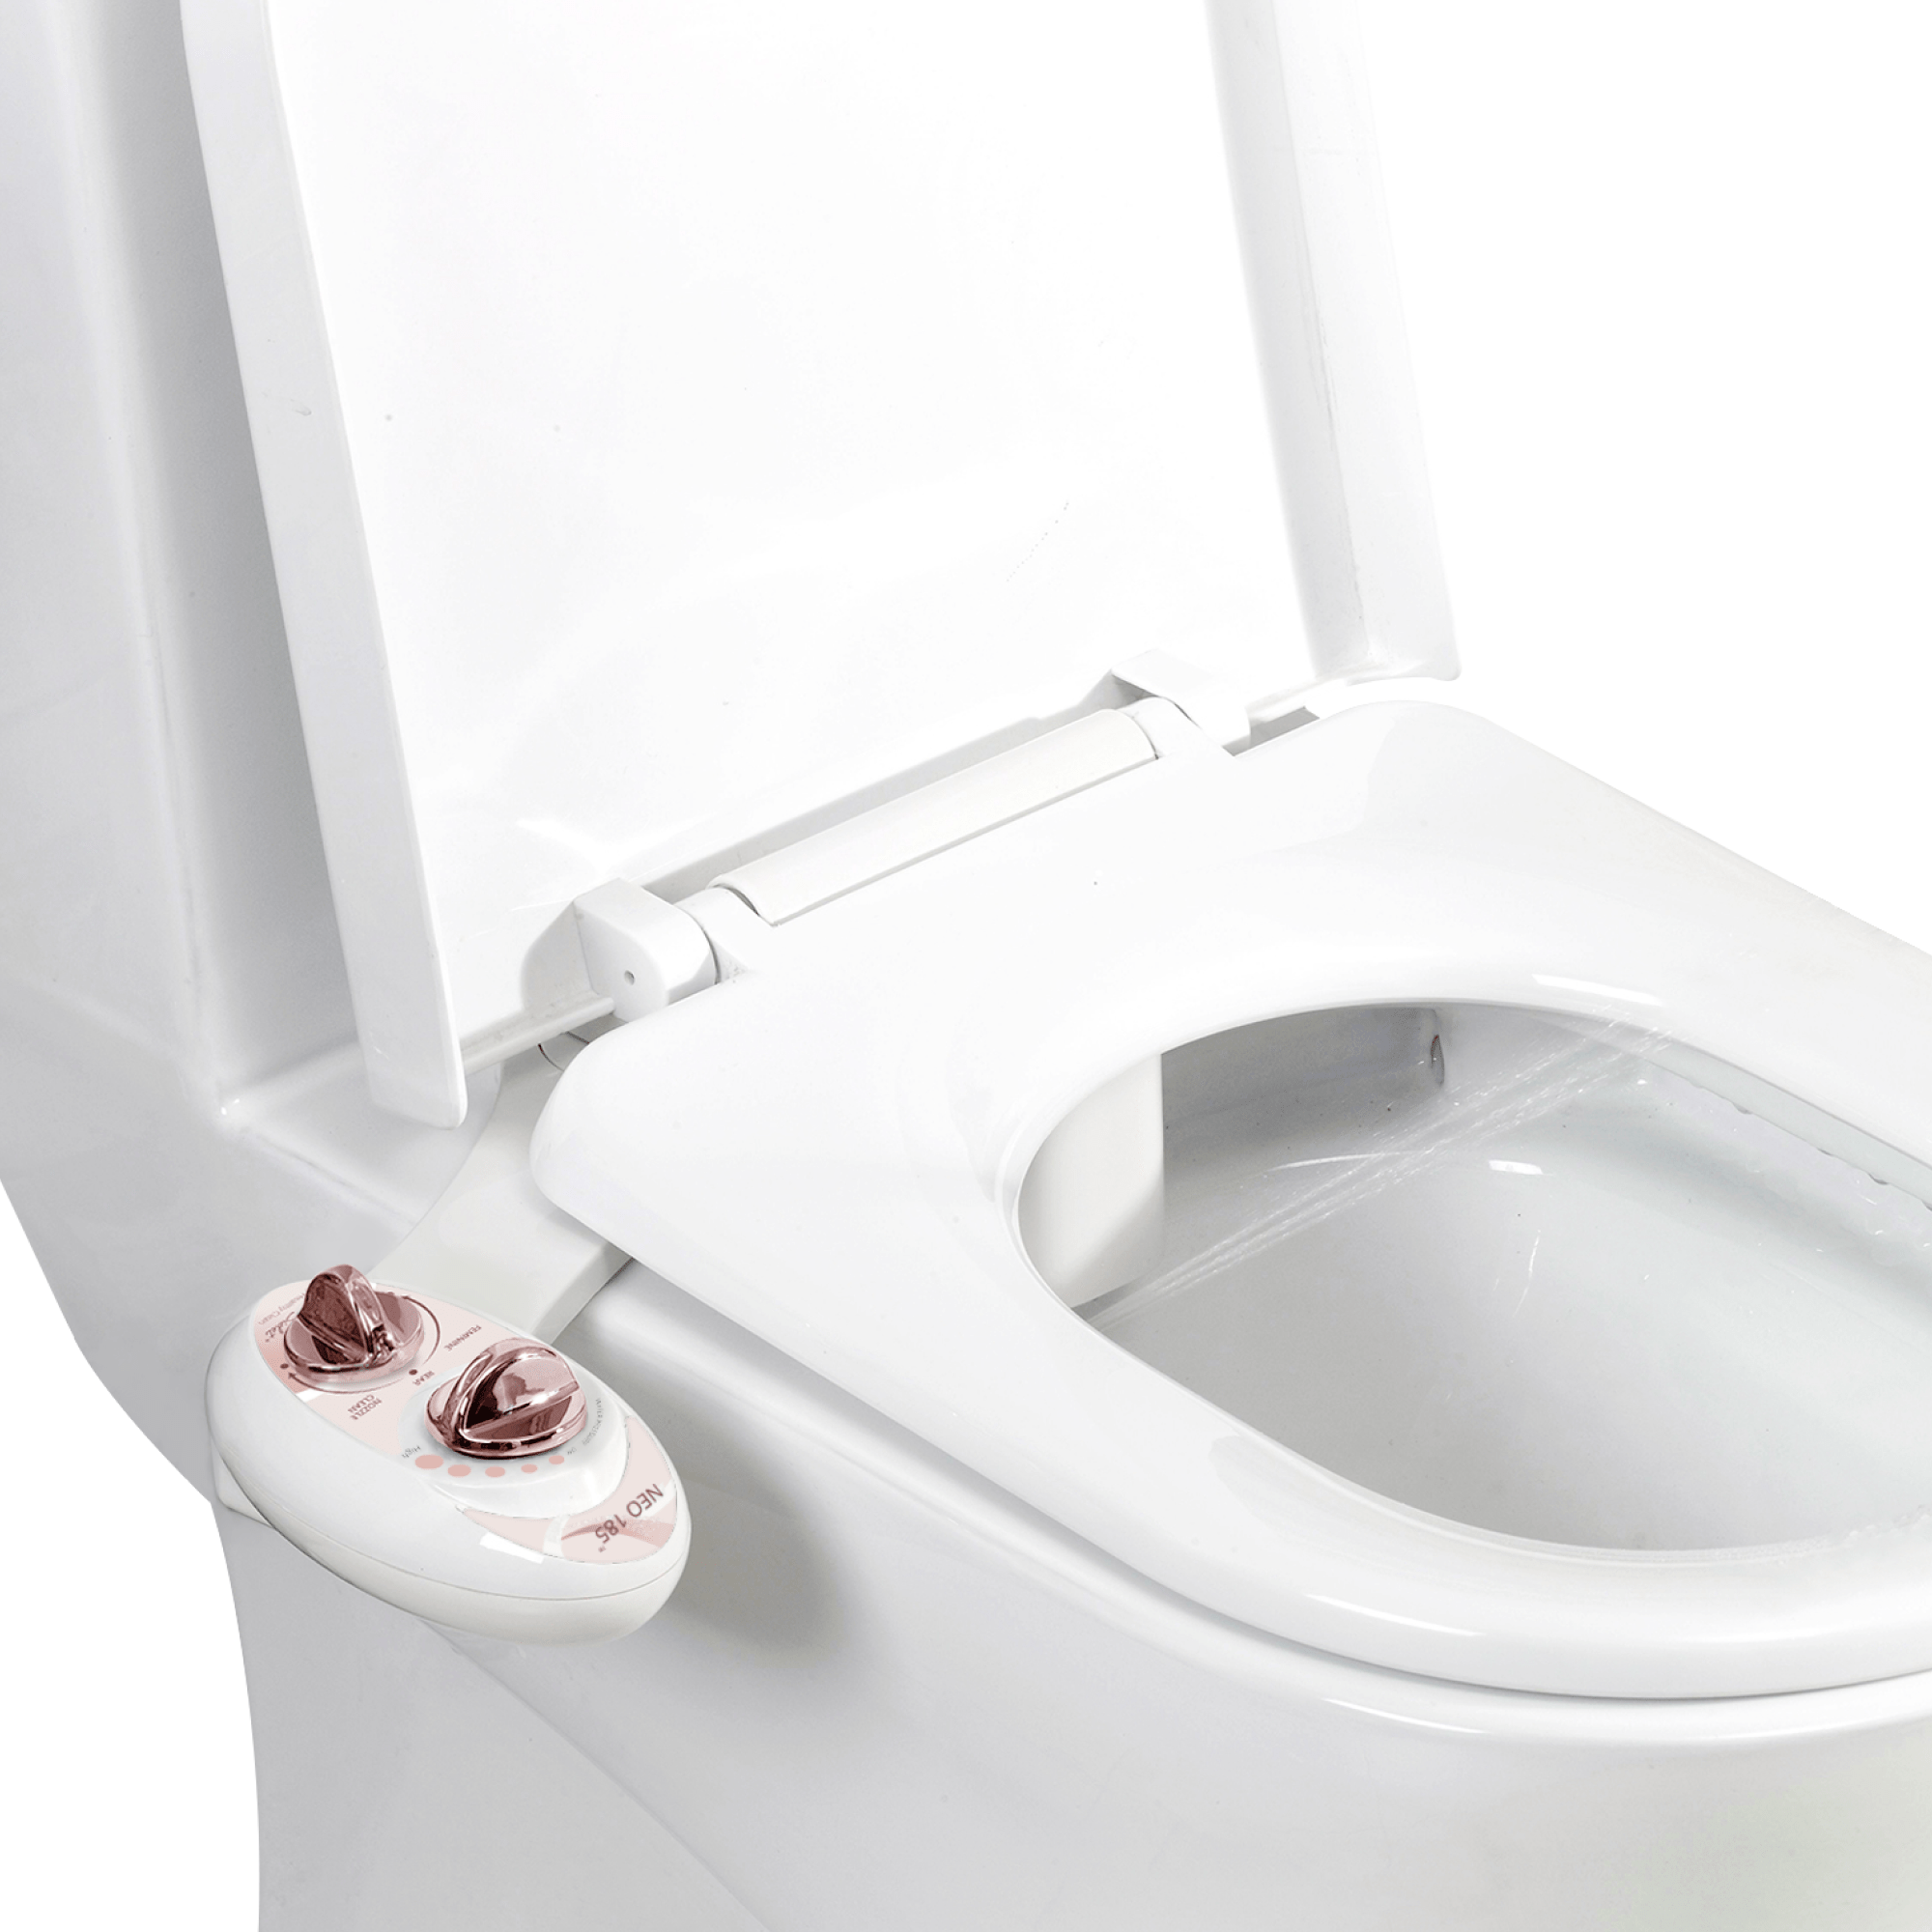 NEO 185: Imperfect Packaging - NEO 185 Rose Gold installed on a toilet with water spraying from nozzles